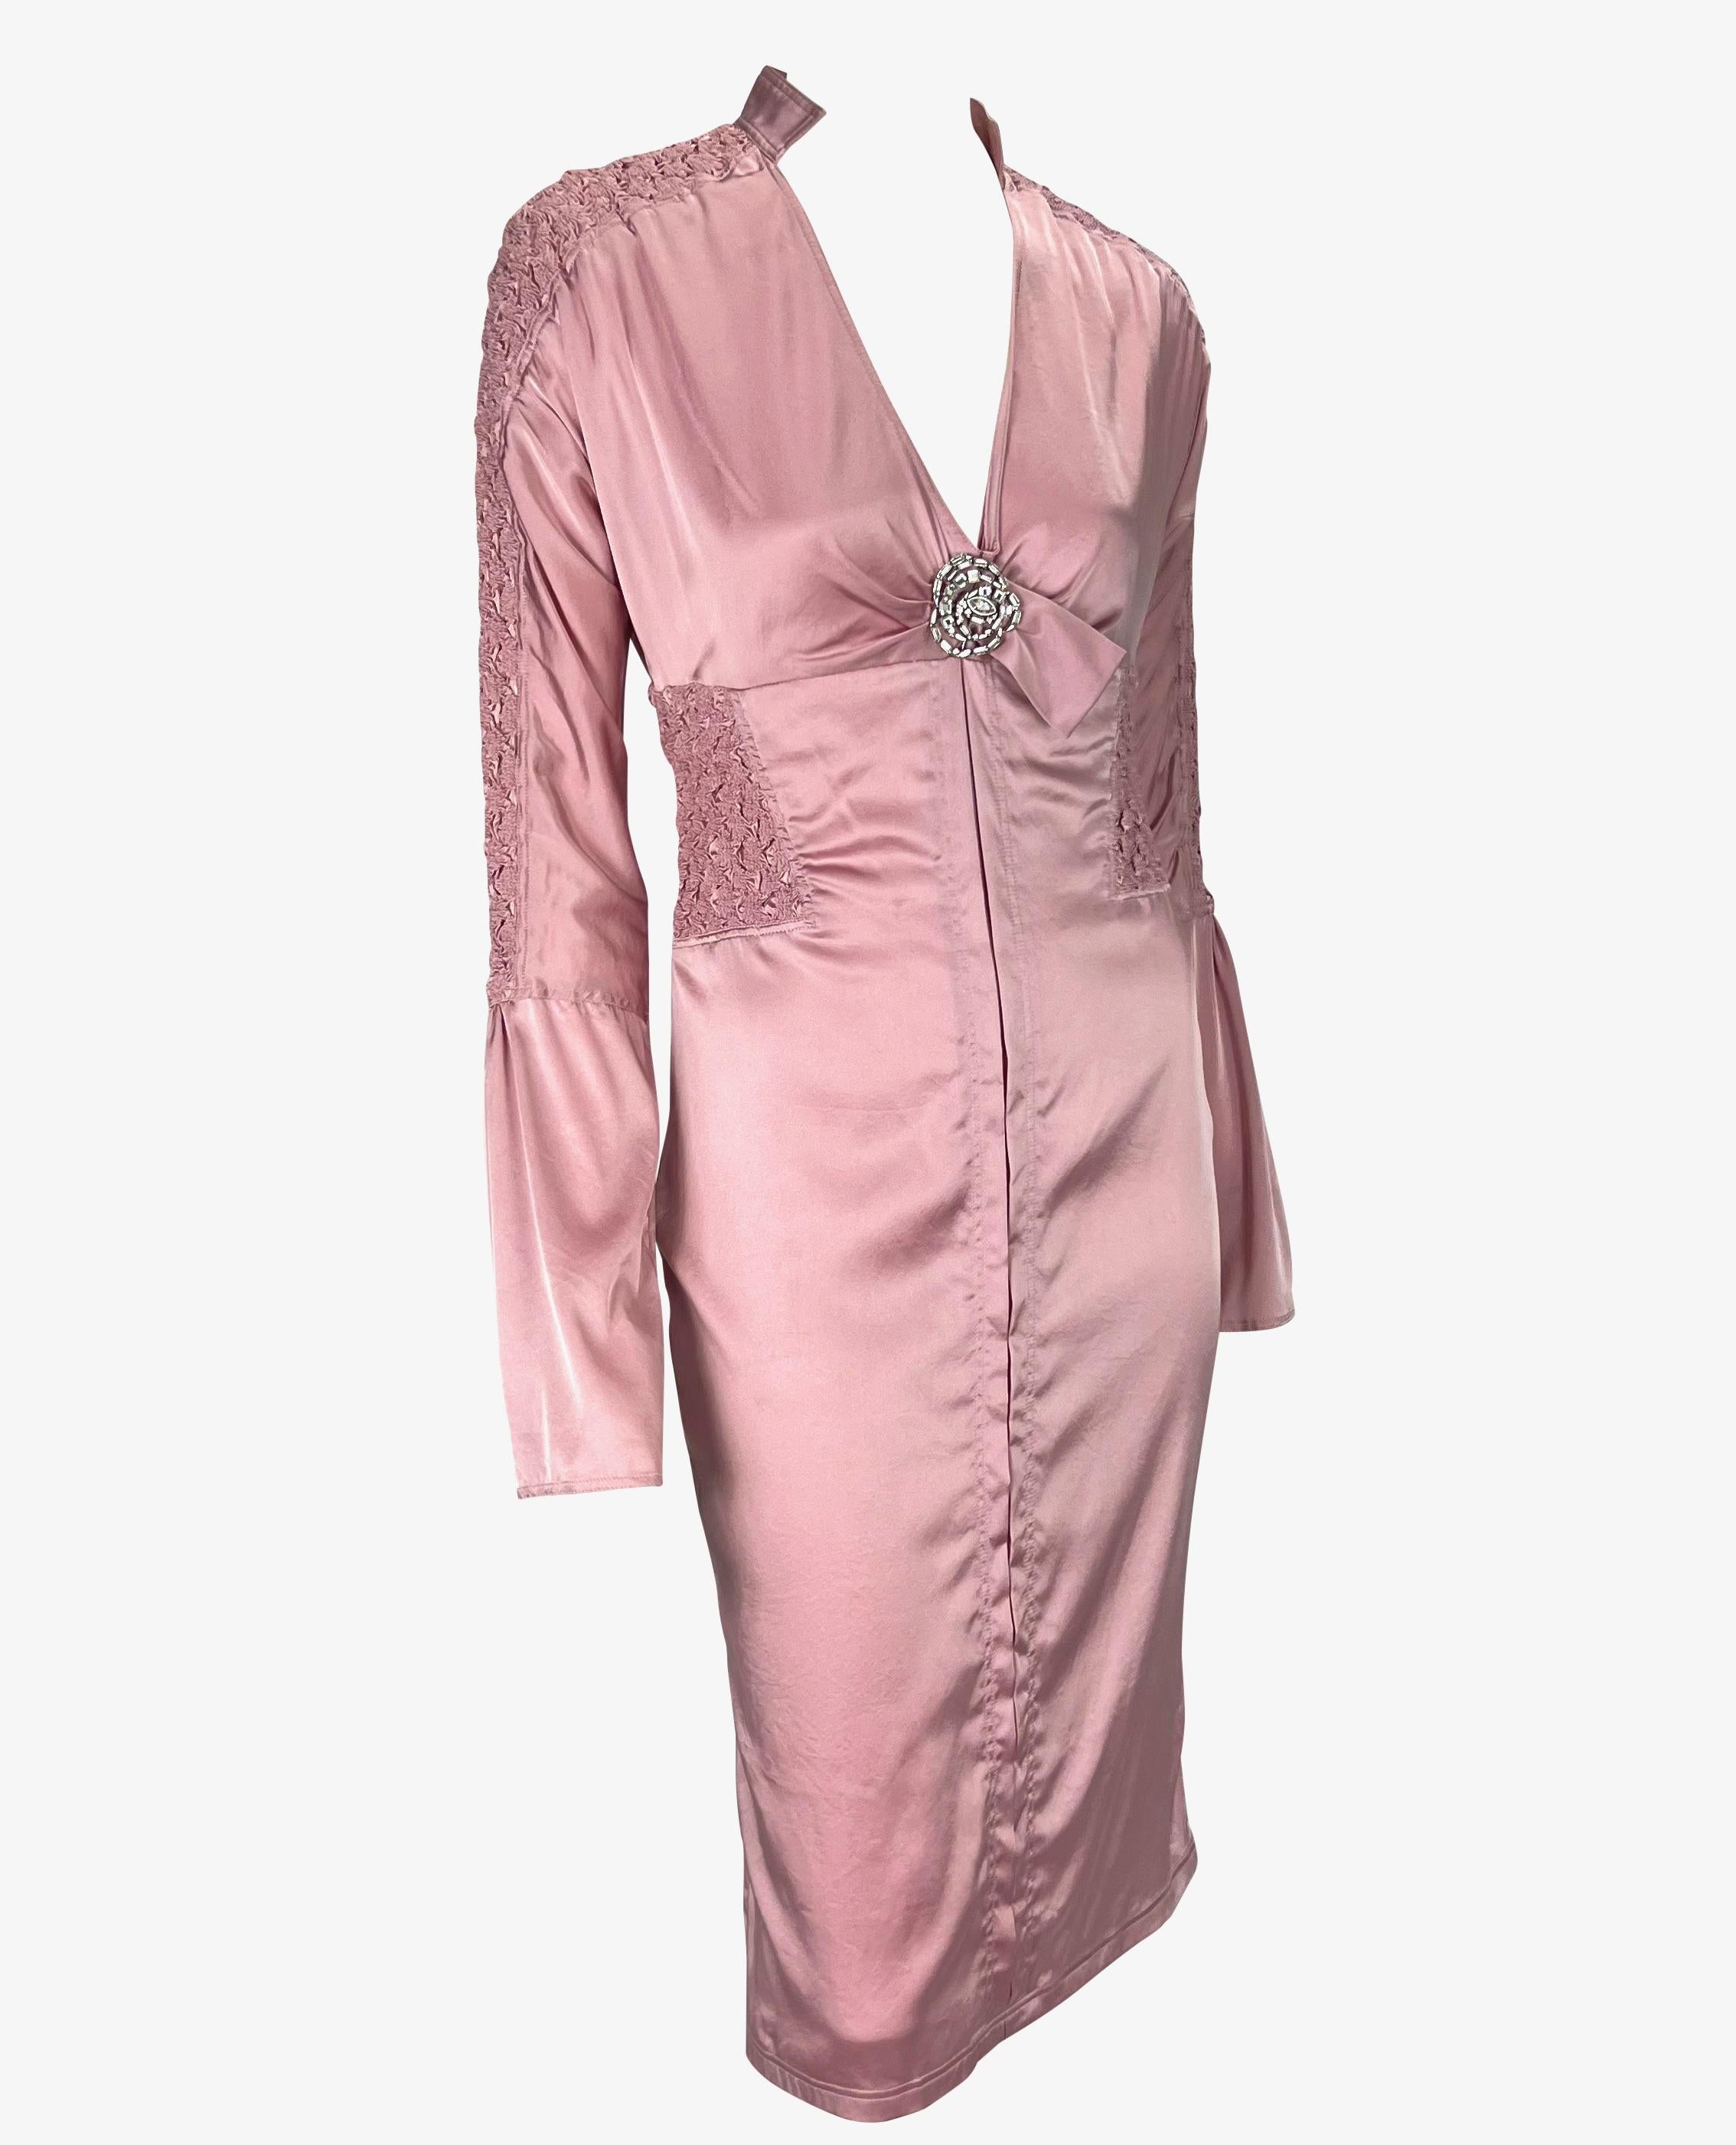 S/S 2004 Gucci by Tom Ford Ruched Pink Satin Rhinestone Brooch Dress In Good Condition For Sale In West Hollywood, CA